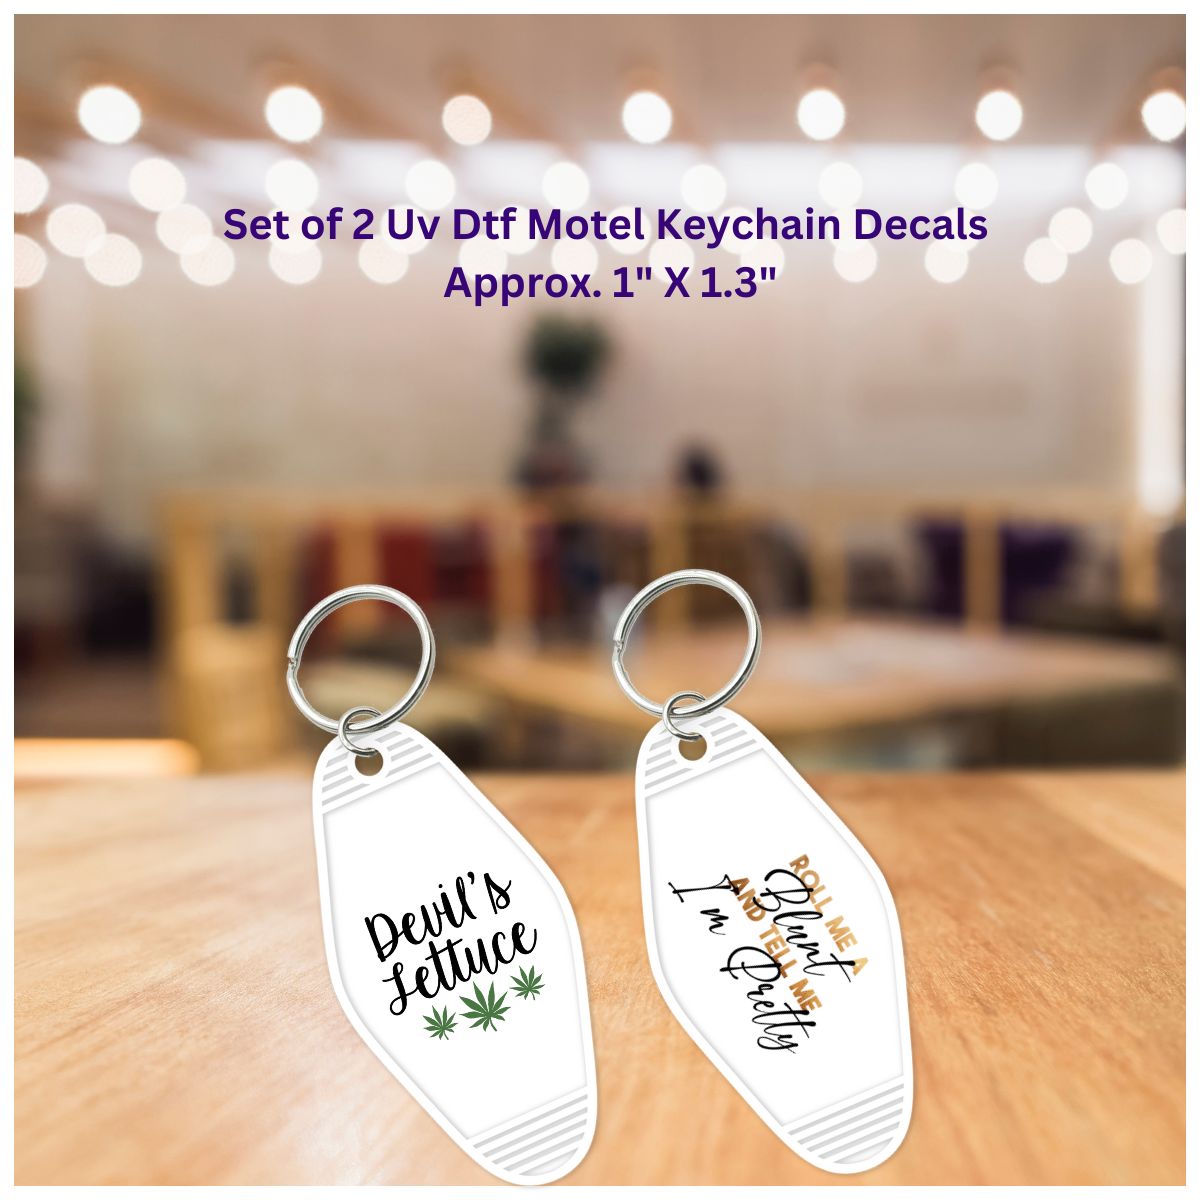 Uv Dtf Decal Set of 2 Motel Keychain Decals Devil's Lettuce & Roll Me A Blunt And Tell Me I'm Pretty 420